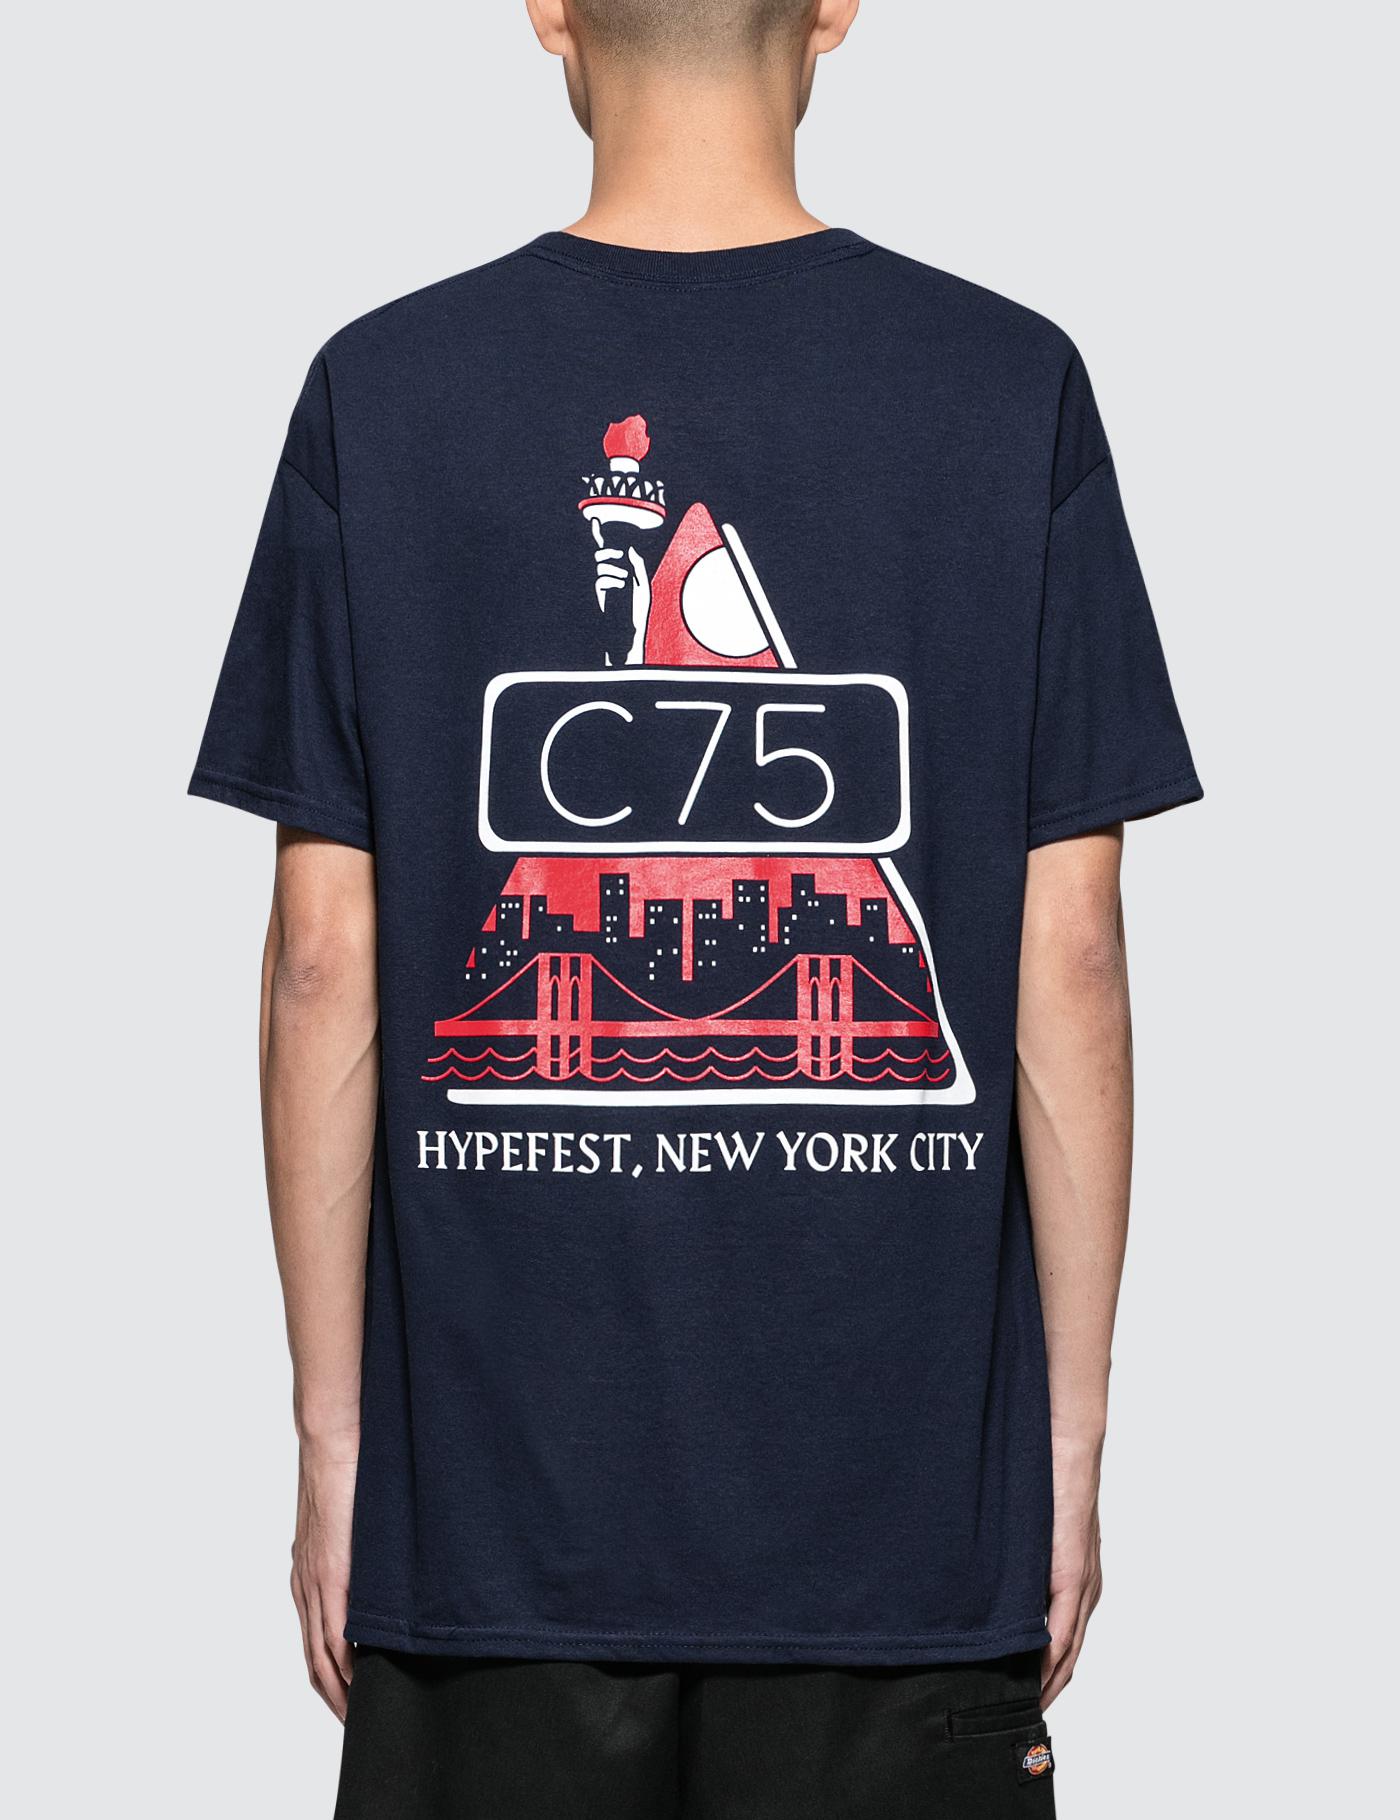 NY State Of Mind S/S T-Shirt by CLUB 75